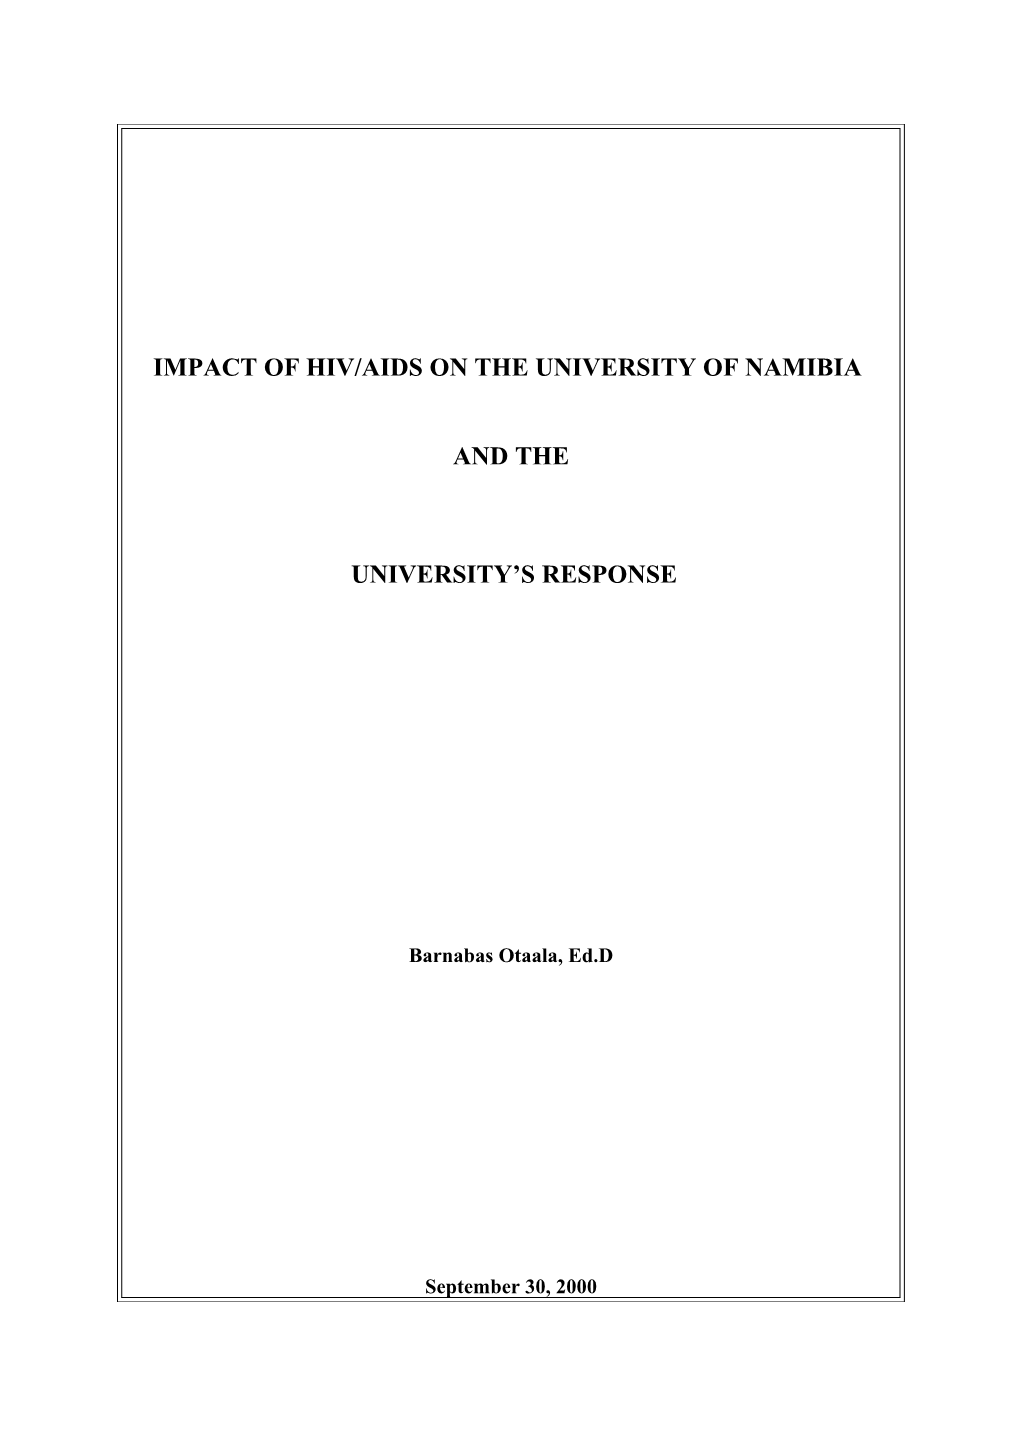 Impact of Hiv/Aids on the University of Namibia